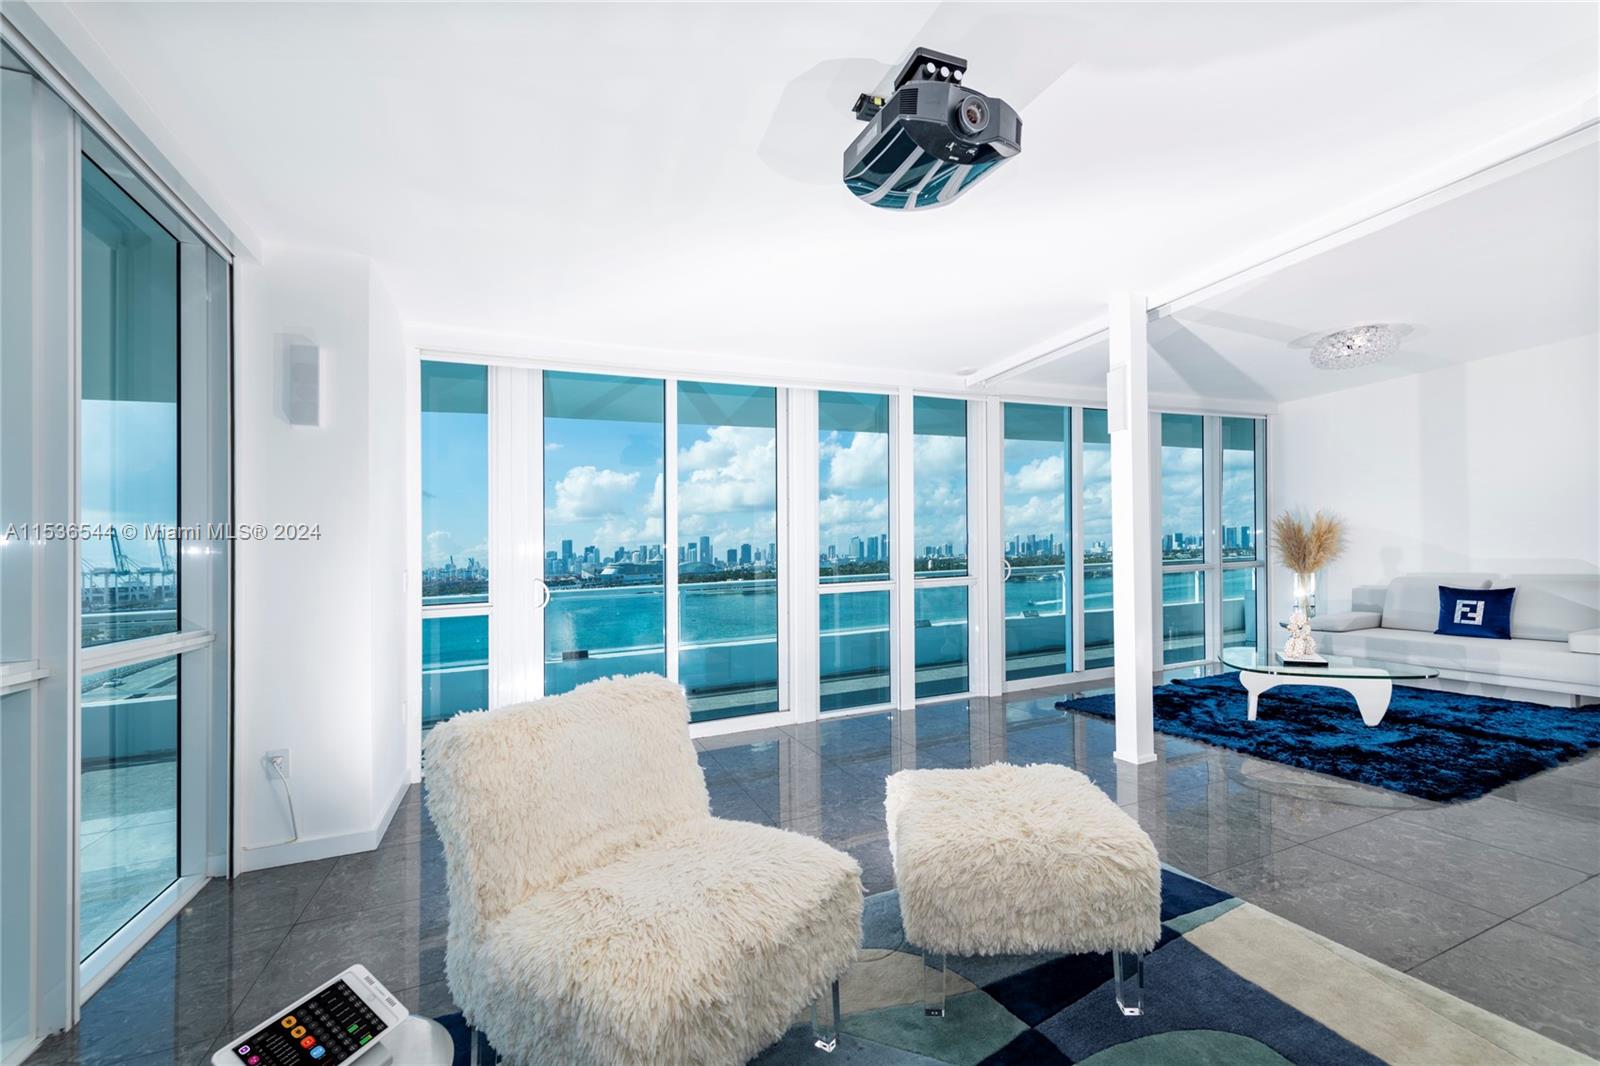 This open floor plan house in the sky located in the heart of south beach offers panoramic 120° wraparound views of the ocean, Miami skyline at the prestigious Bentley bay residences . This one-of-a-kind unit boasts floor-to-ceiling windows, 9 ‘ceilings, state-of-the-art Crestron controlled audio & visual/lighting & shade system & 160’ screen /projector . Gourmet chef's kitchen is complete with top-of-the-line Gaggenau & Sub-Zero appliances.Huge wrap around Corner balconies over 1200 sqft Direct water views/no obstruction Marina downstairs/concierge . Your home and your boat in the same spot..